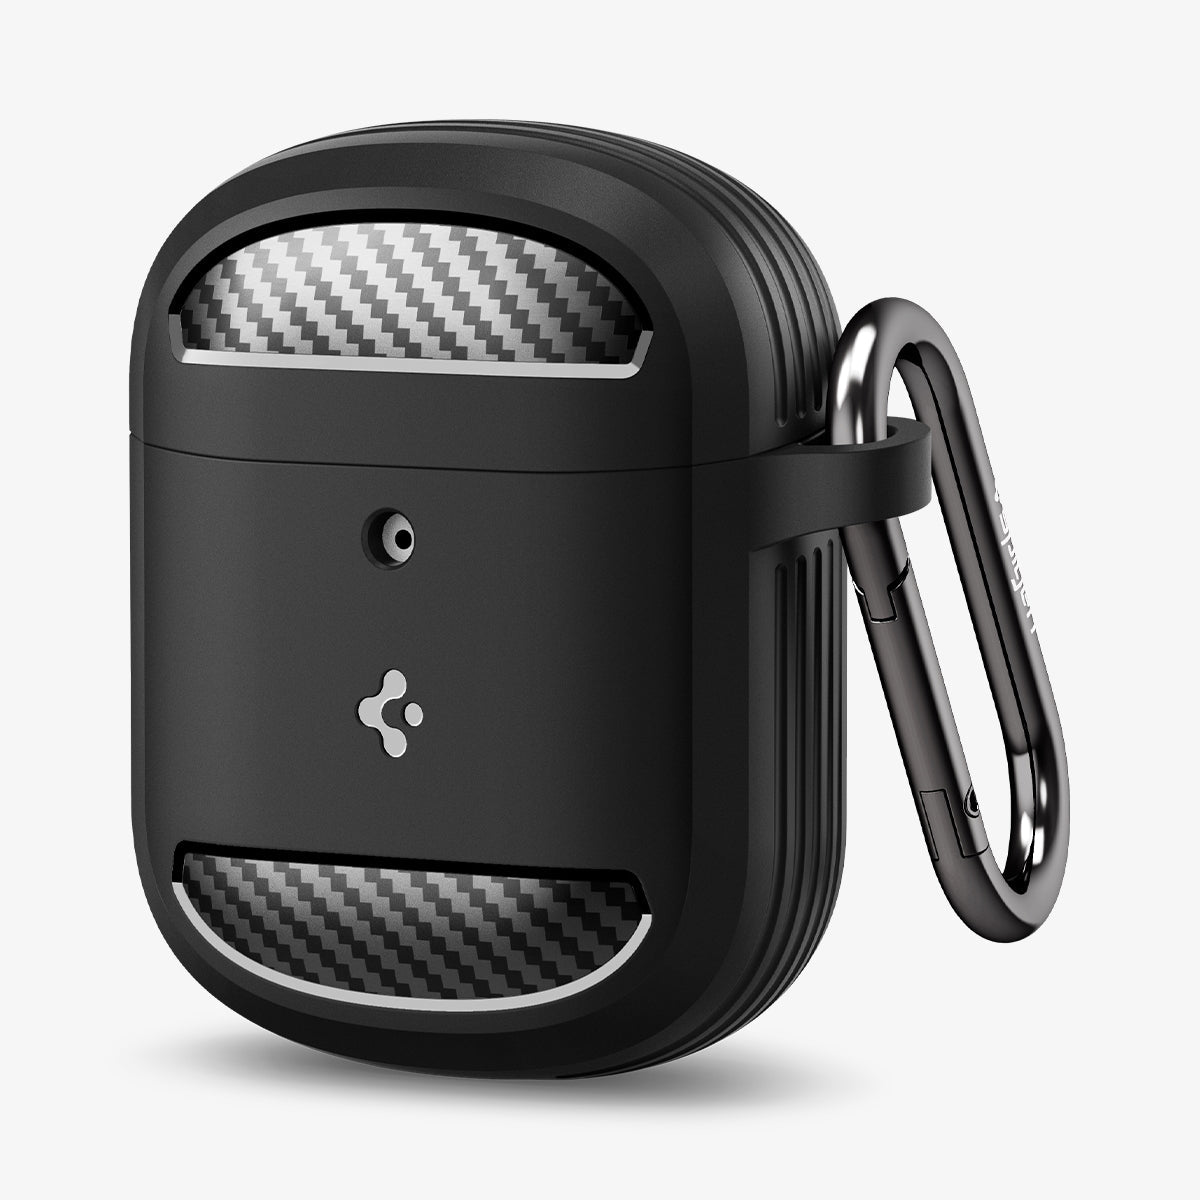 ACS05133 - Pixel Buds Pro Case Rugged Armor in matte black showing the front, side and carabiner